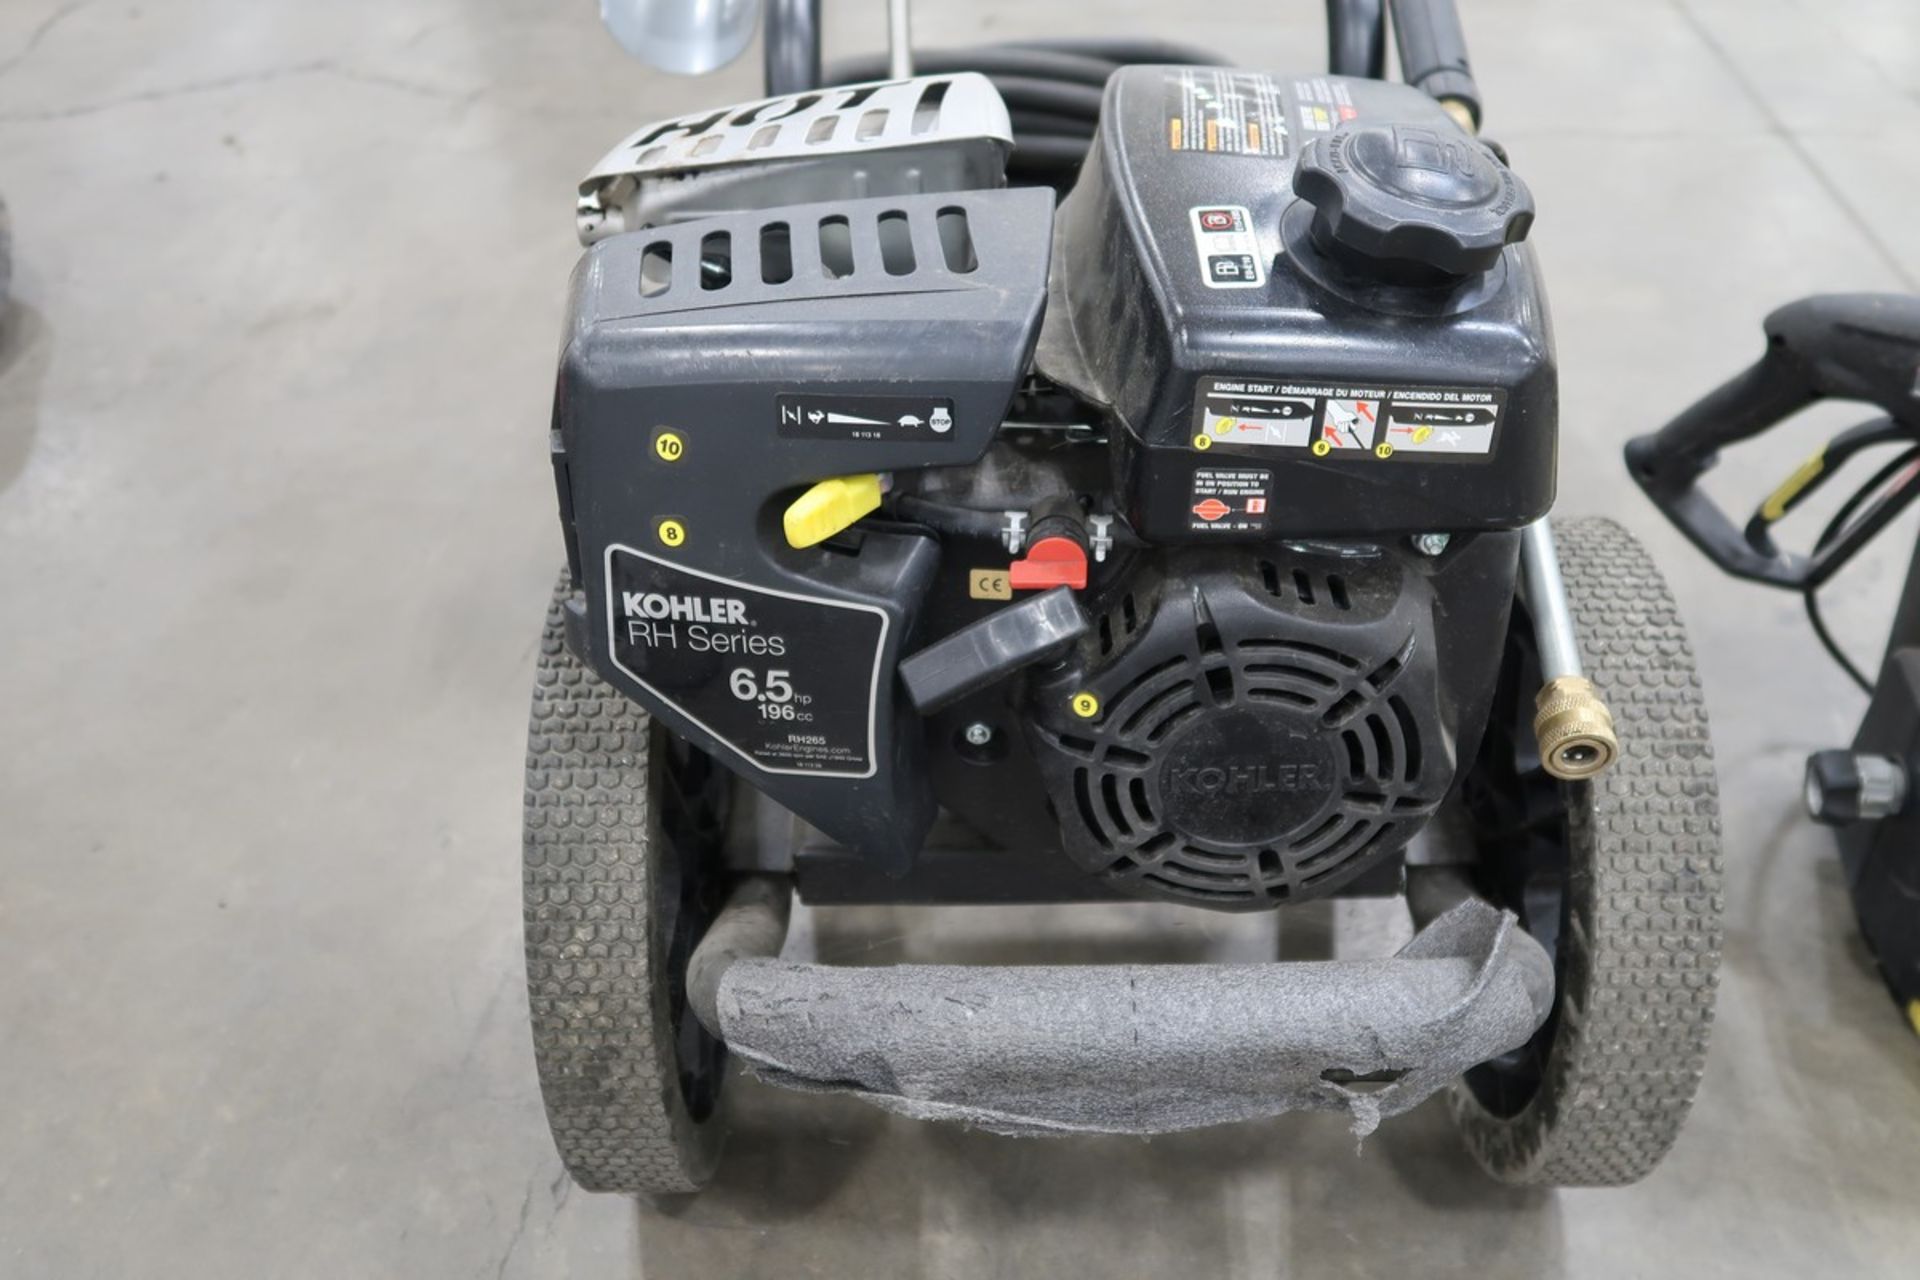 Simpson MS60763-S Gas Powered Pressure Washer - Image 3 of 5